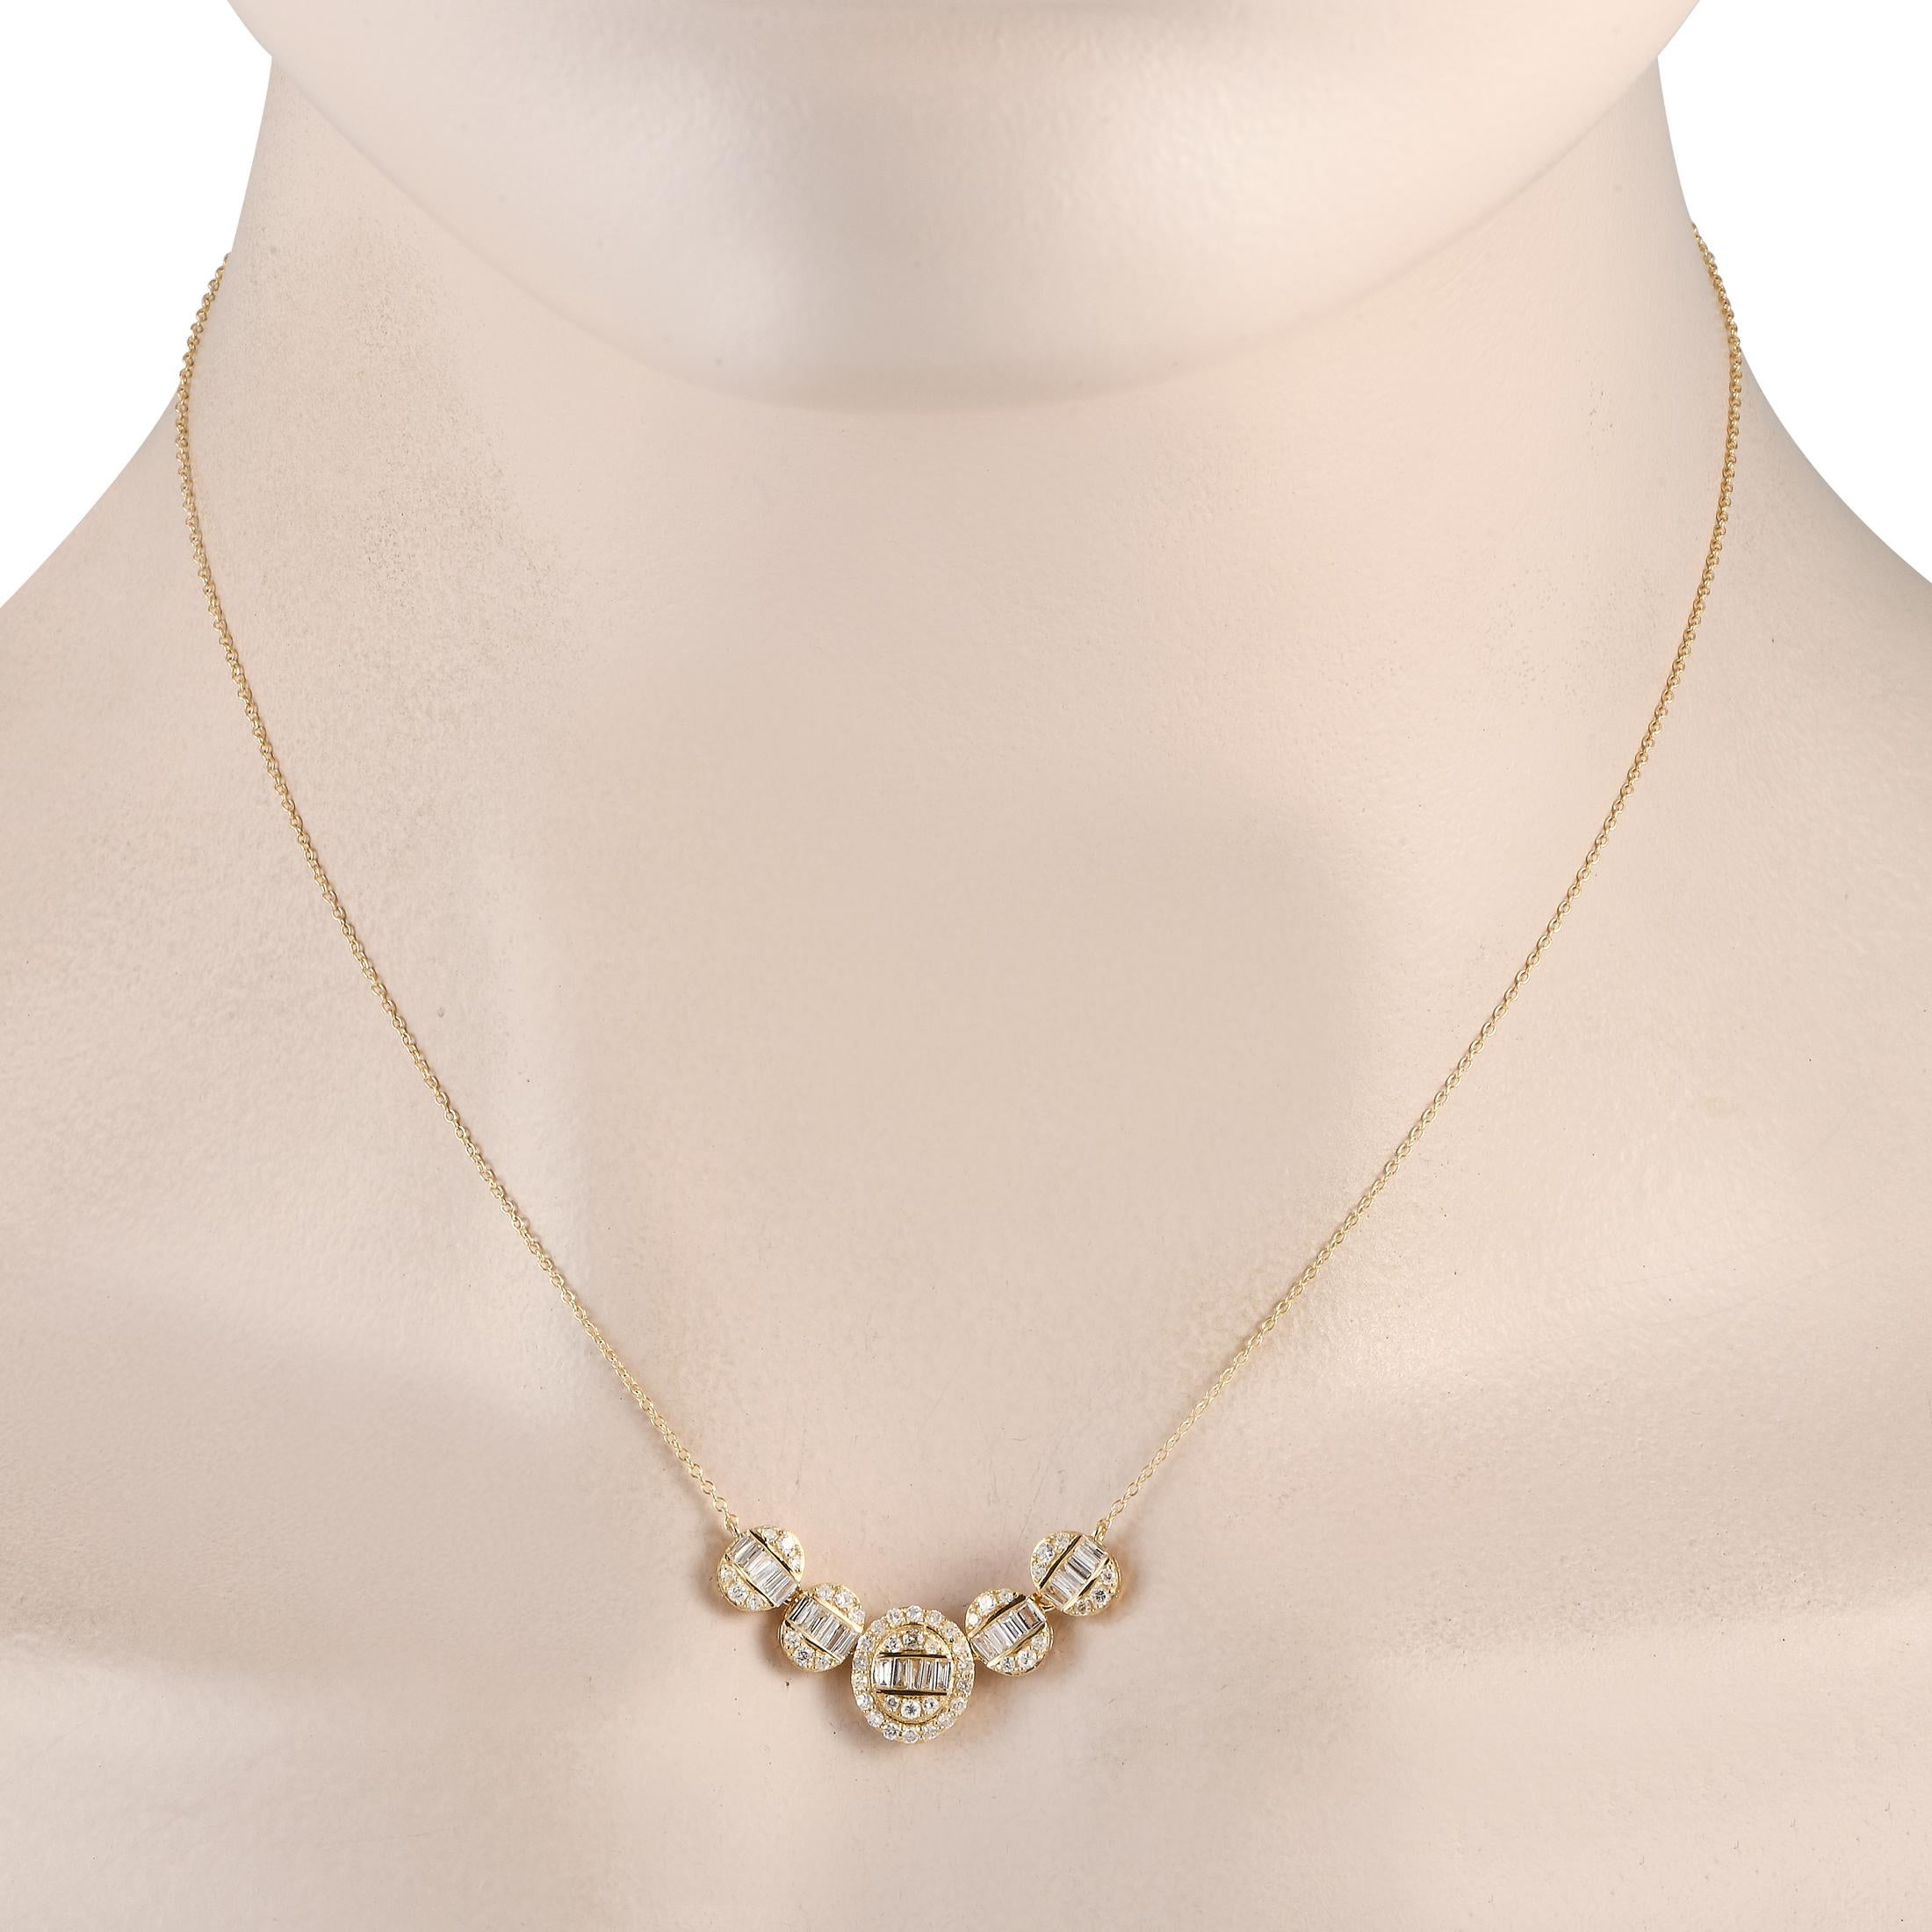 Round-cut diamonds and diamond baguettes totaling 0.60 carats make this necklace simply unforgettable. Crafted from 14K Yellow Gold, this pieces stunning pendant measures 0.45 long by 1.15 wide and is suspended from a 15 chain.This jewelry piece is